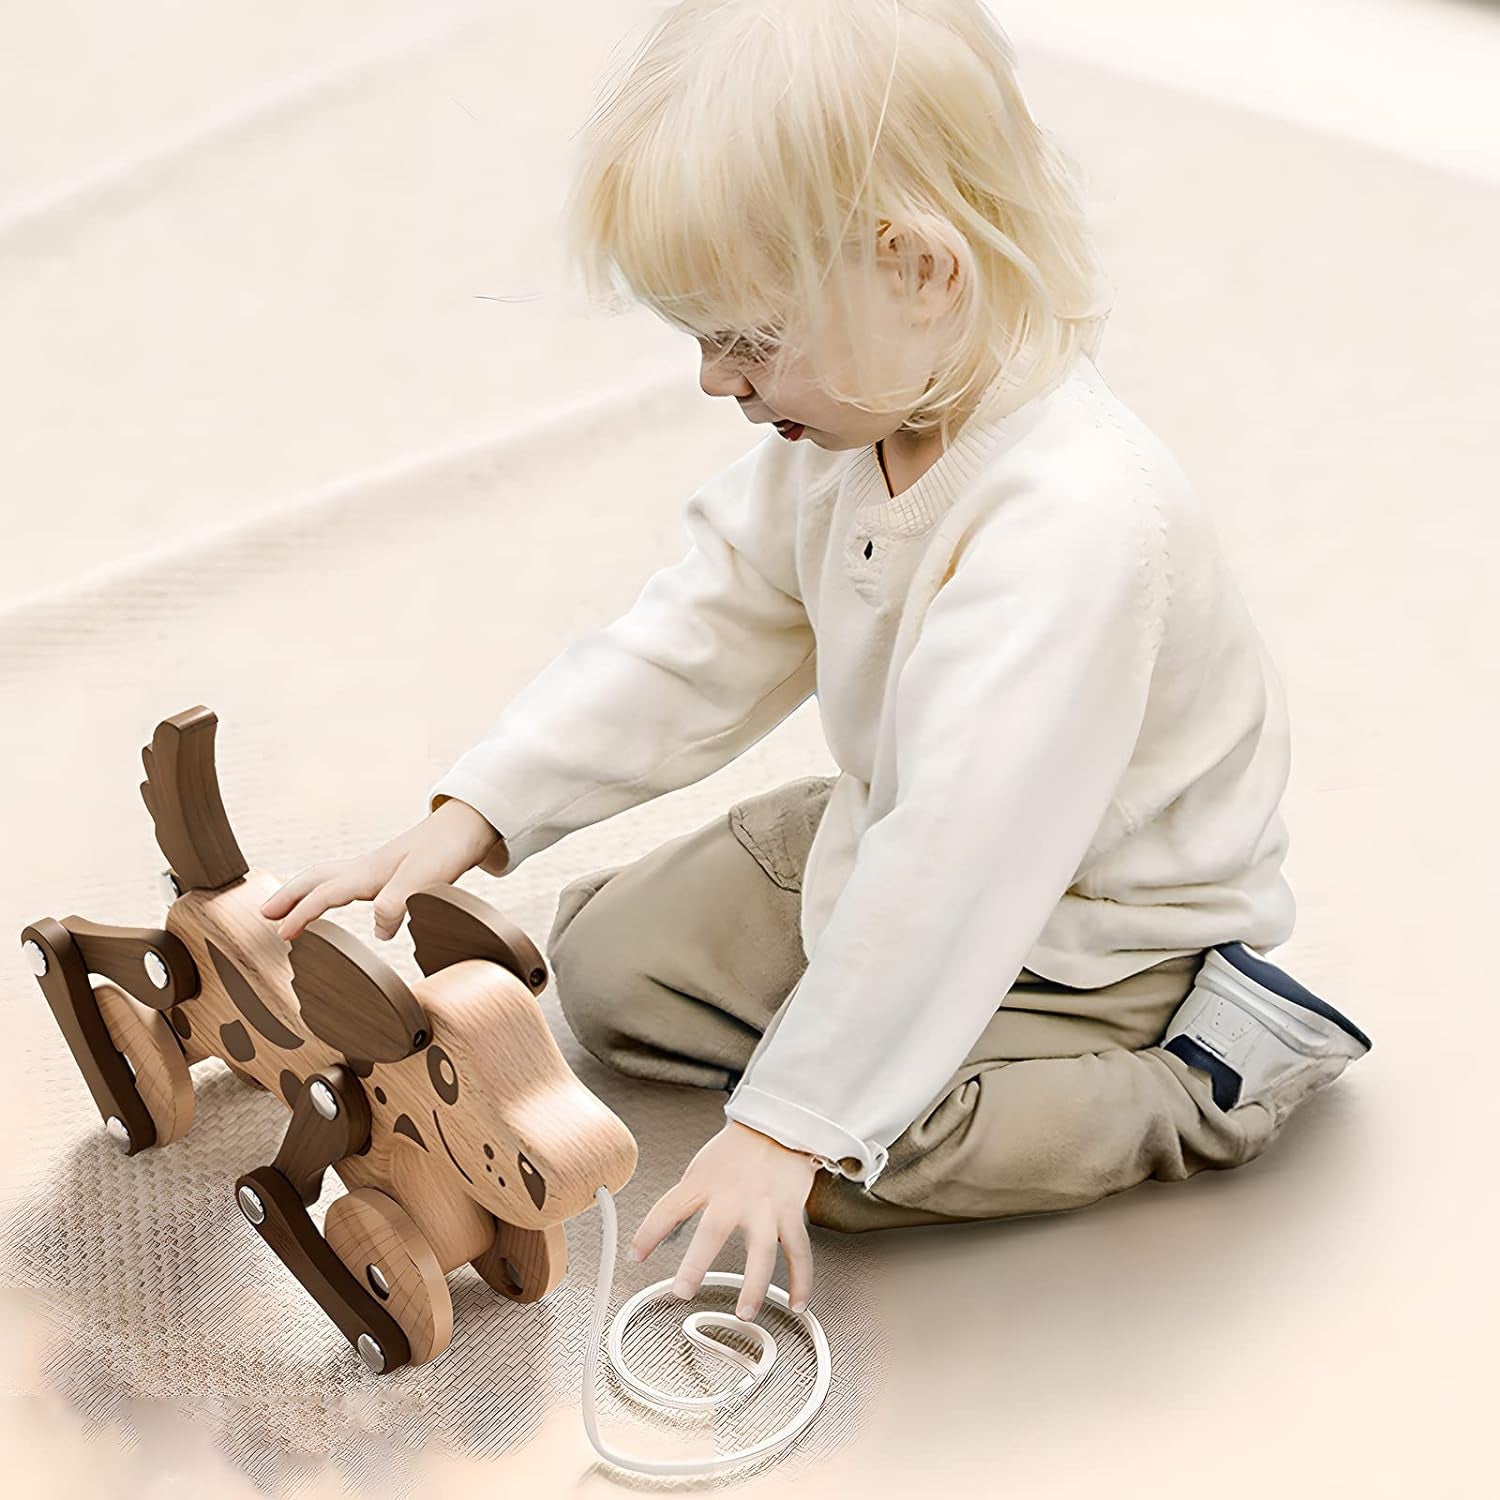 Montessori Toys 1 2 3 4 Years Old Boys Girls, Pull along Walking Toys, Wooden Walking Pull Dog Toy for Baby Toddler, Walk along Puppy Pull, Wooden Pull & Push Toy, Running Mechanical Dog MT5022